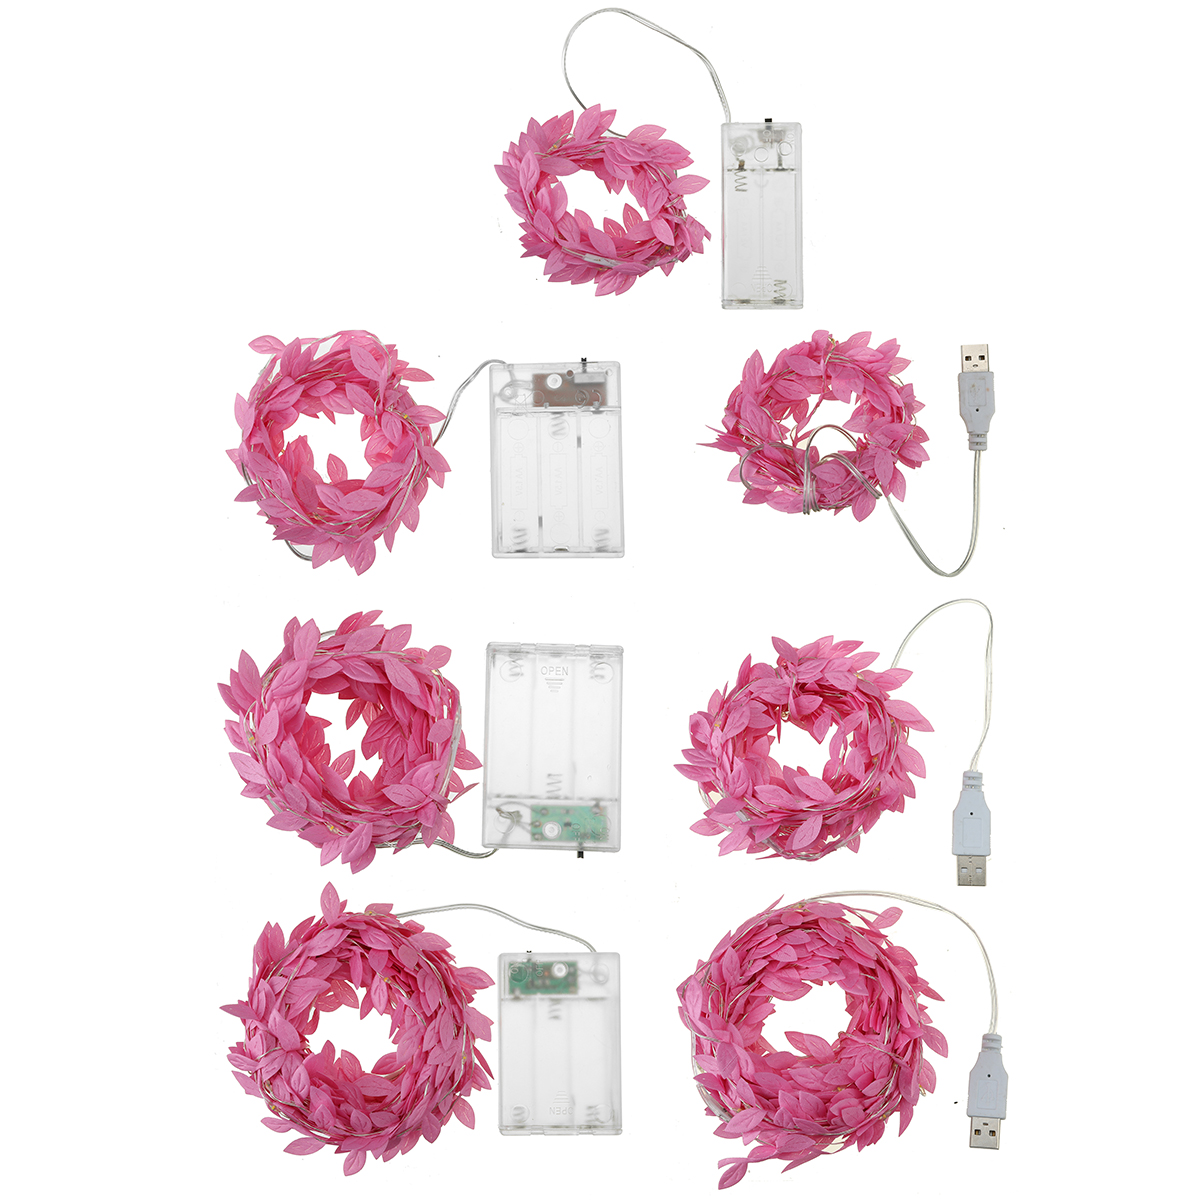 23510M-Pink-LED-Leaves-Ivy-Garland-Fairy-String-Light-Party-Xmas-Garden-1757602-3